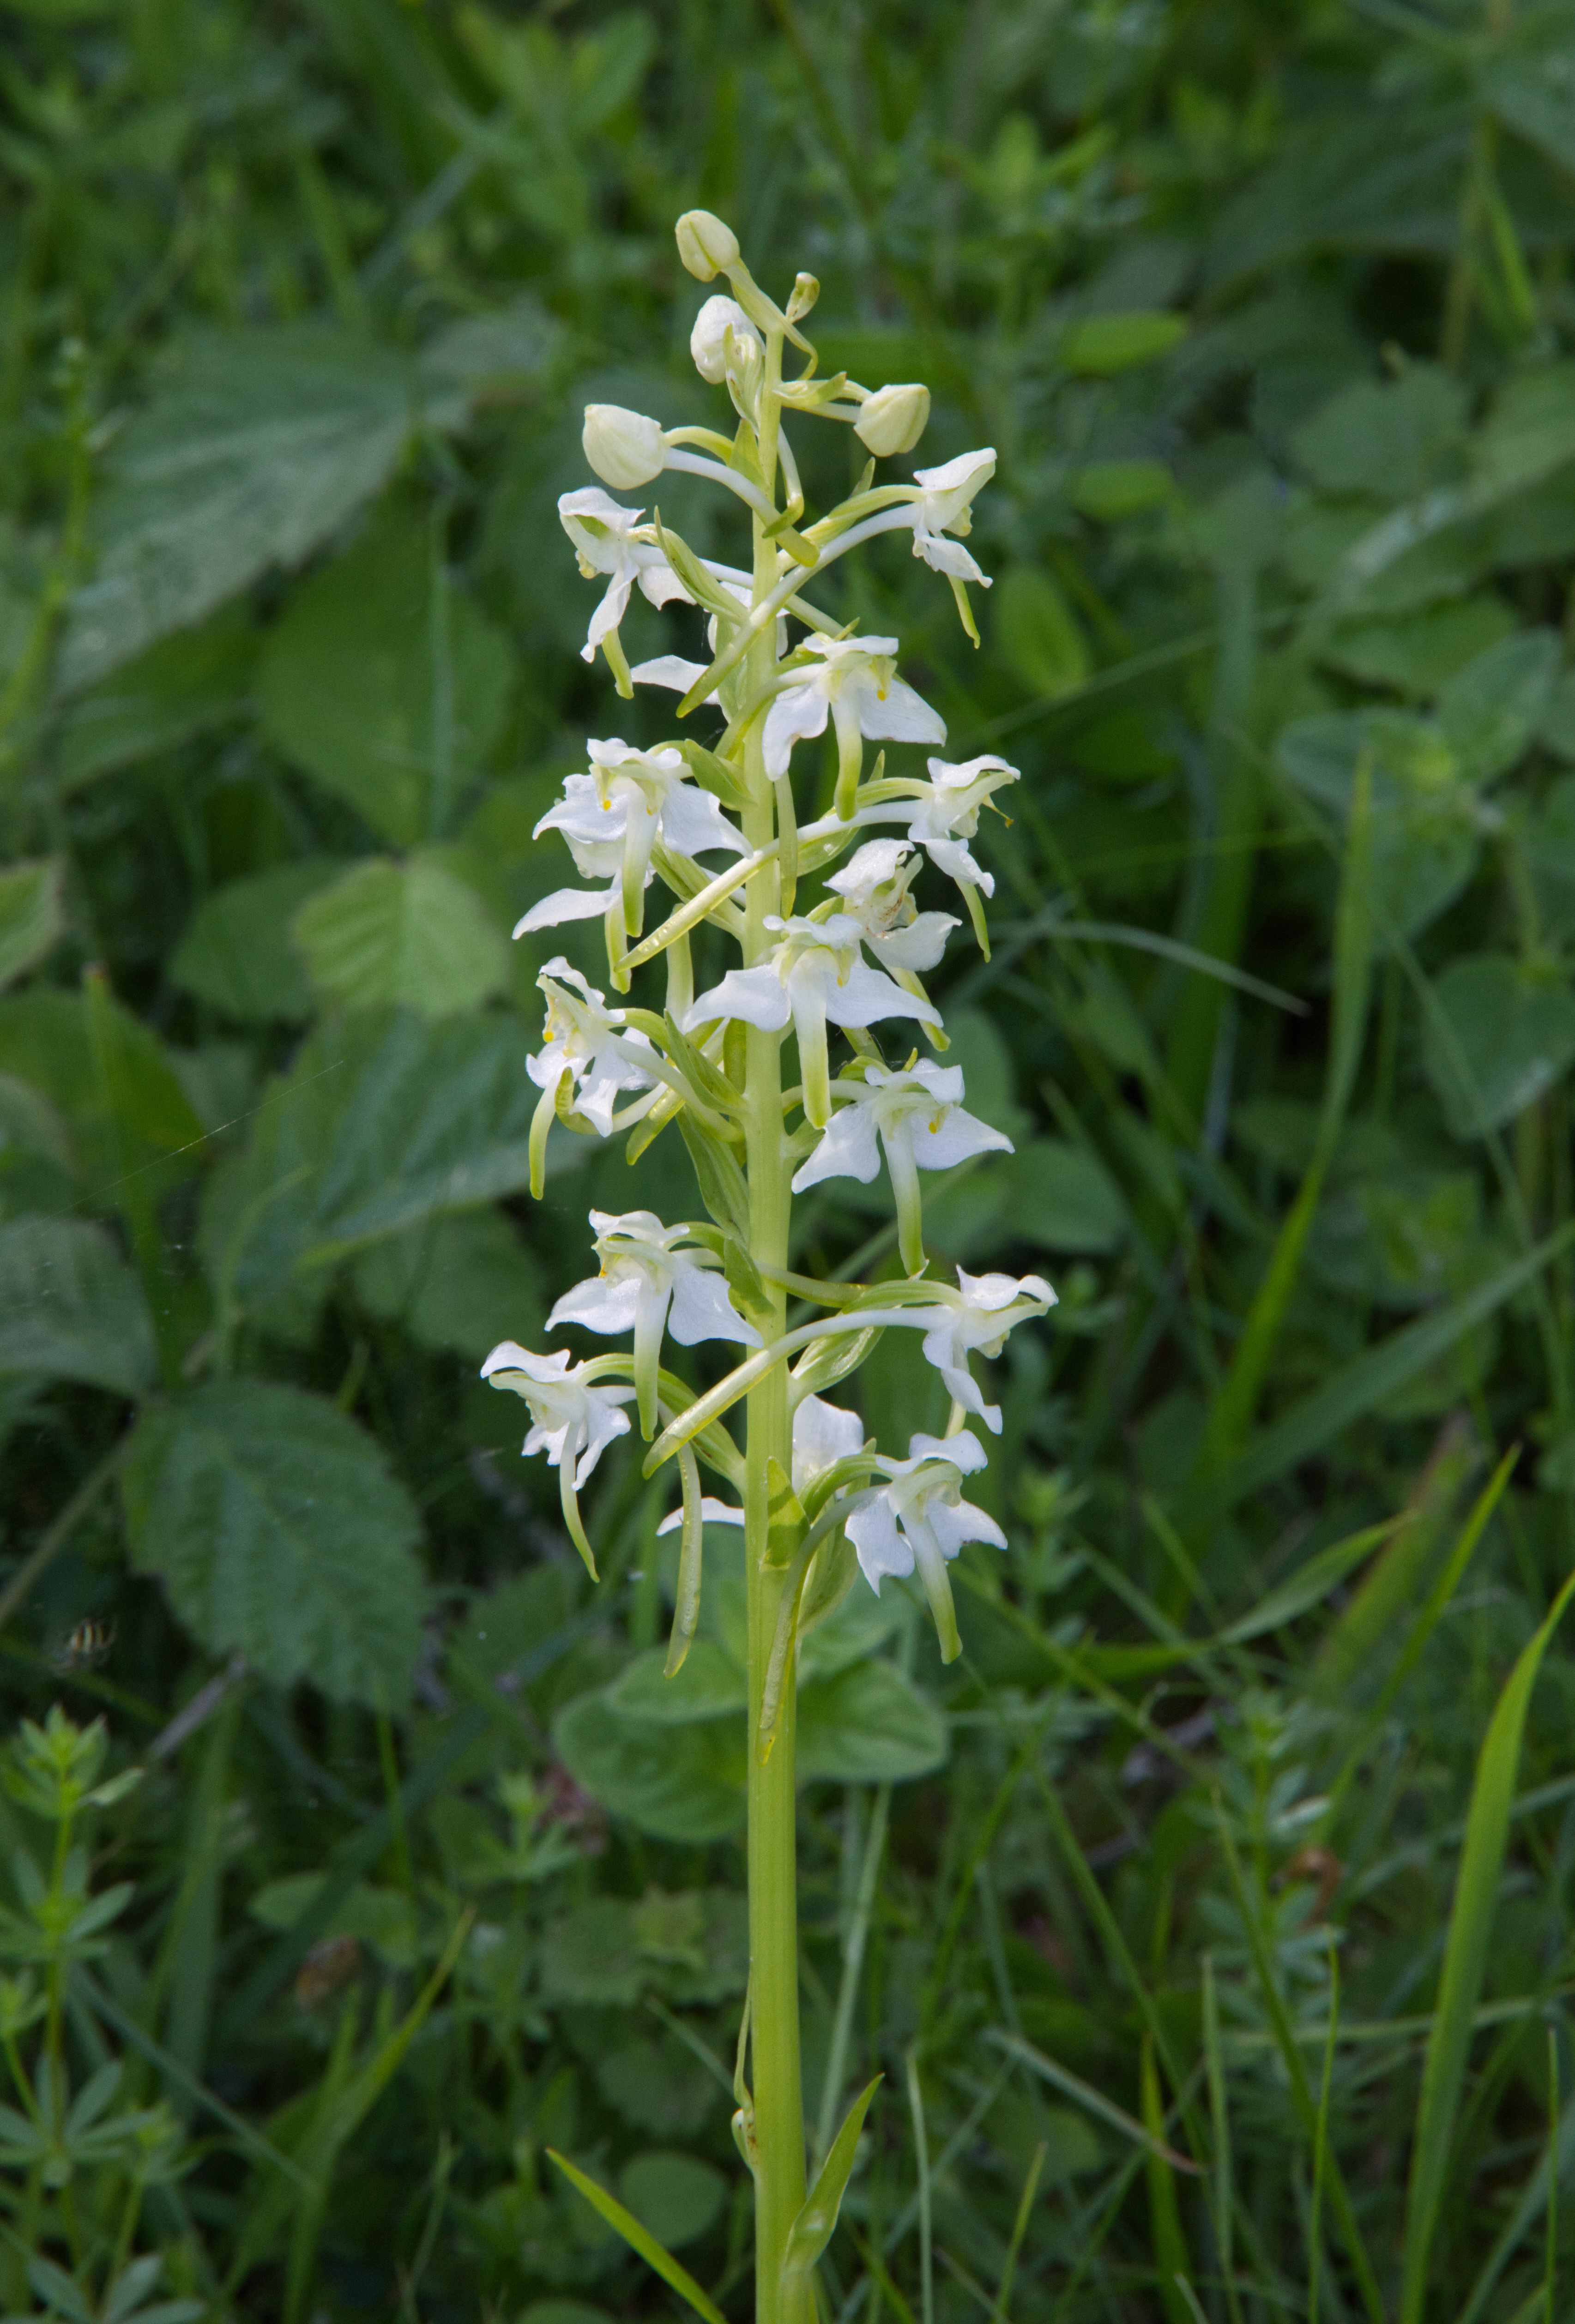 Greater Butterfly Orchid with white delicate flowers